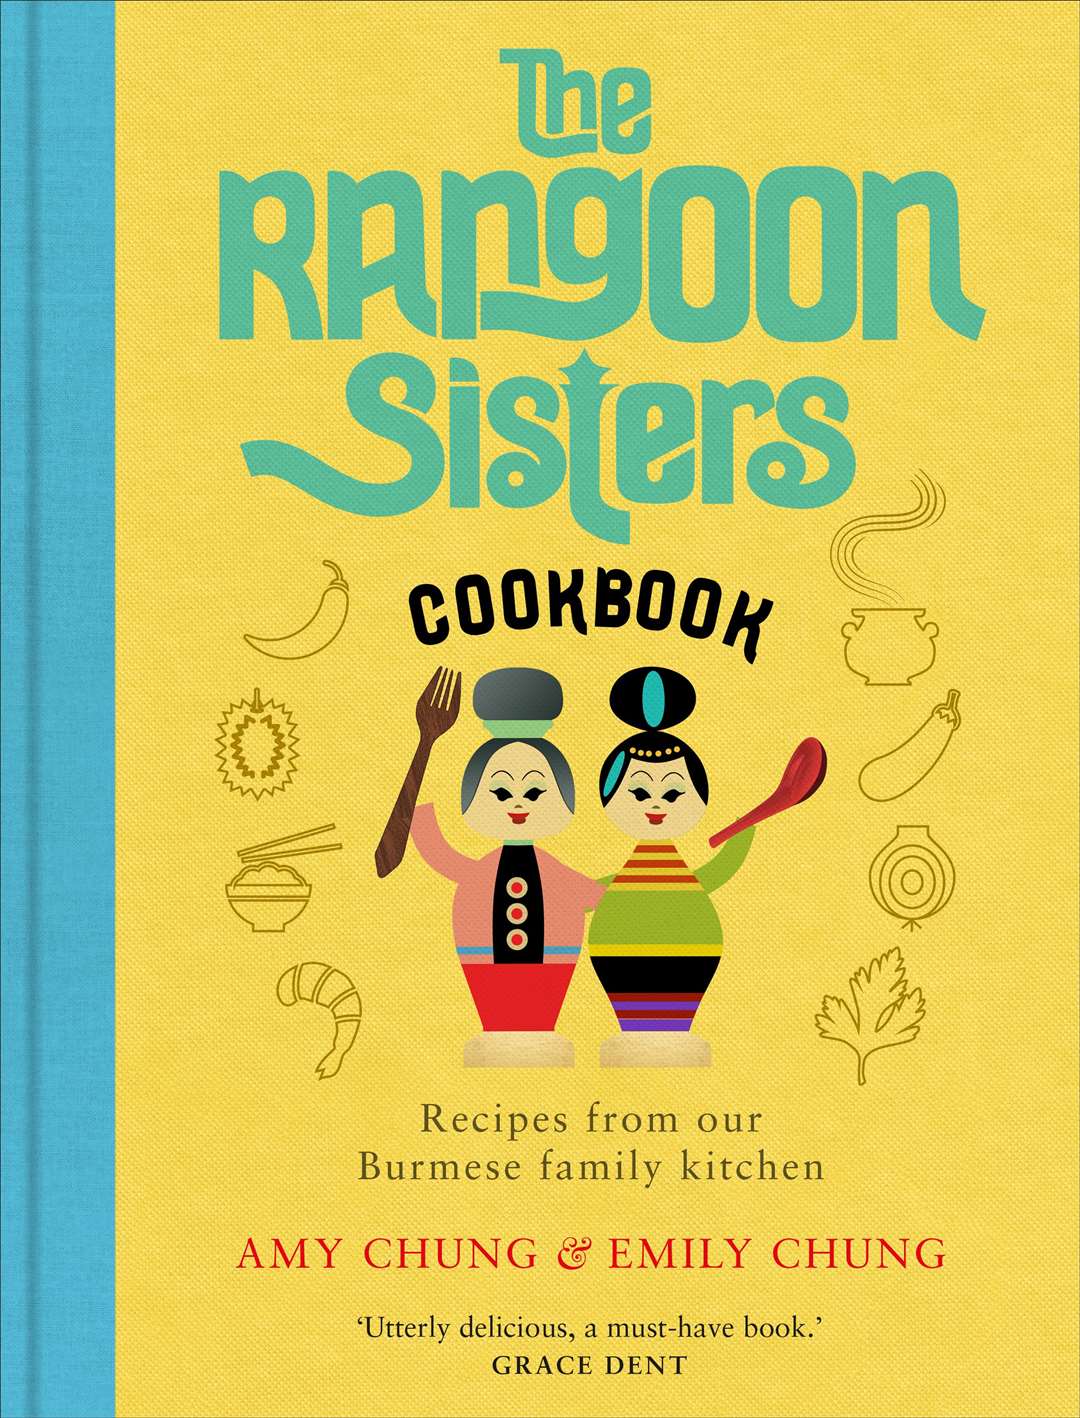 The Rangoon Sisters: Recipes From Our Burmese Family Kitchen by Emily and Amy Chung.